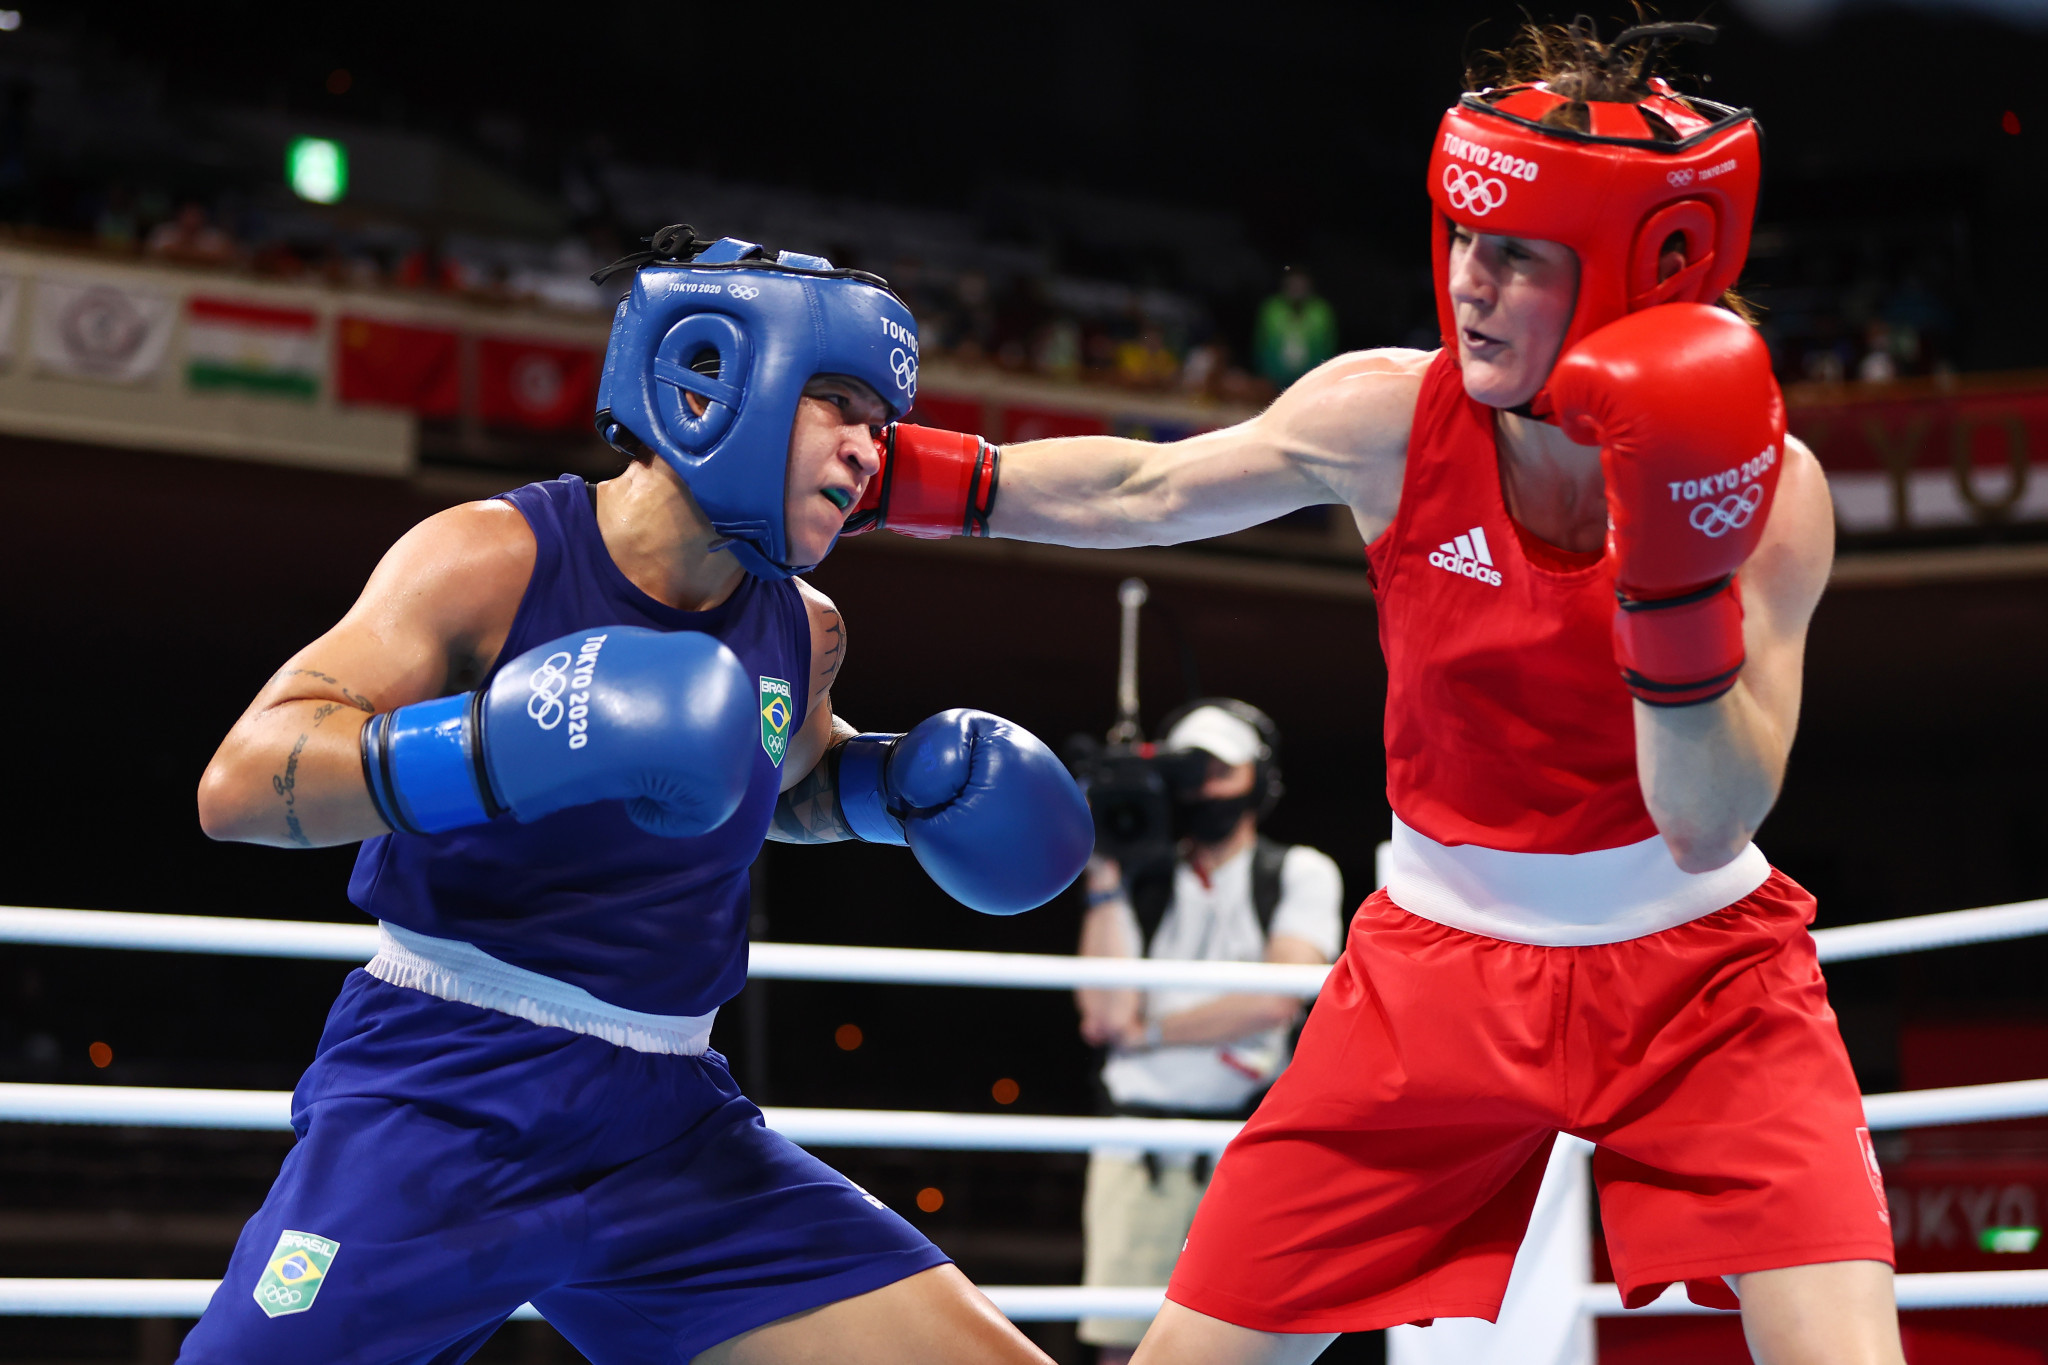 Boxing remains a popular Olympic sport bringing value to the Olympic Games, despite the IOC's ongoing row with IBA ©Getty Images